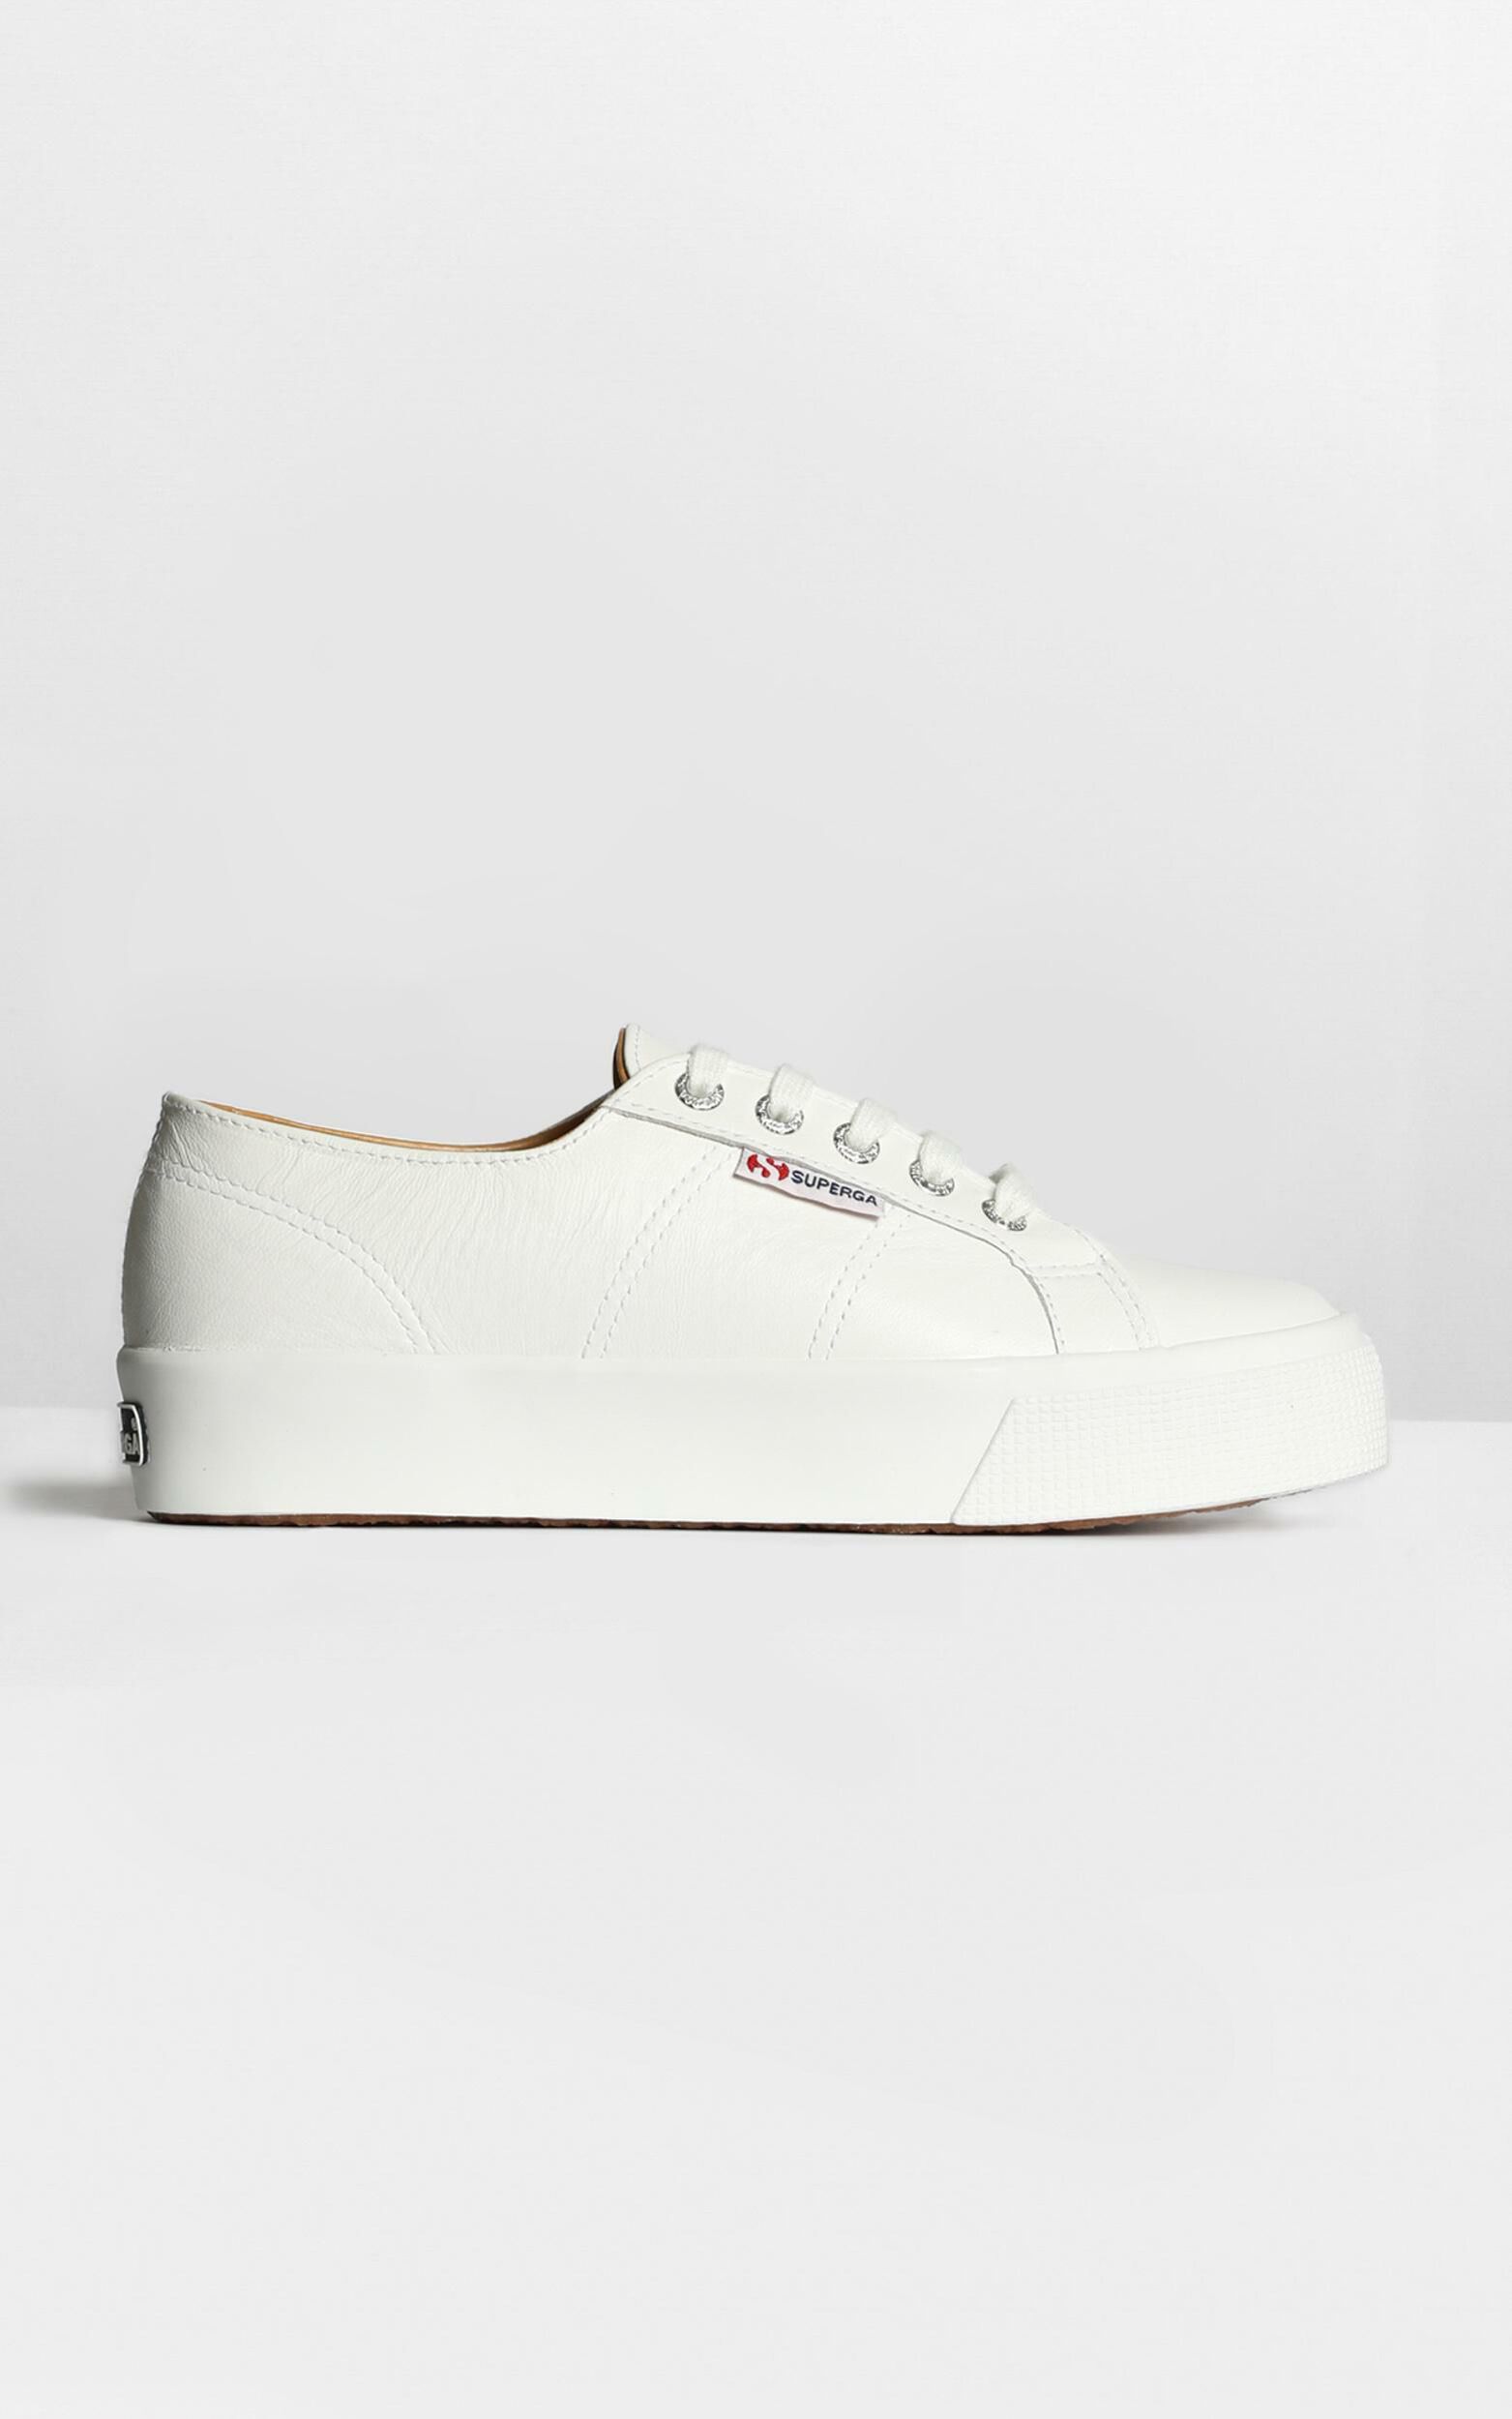 Superga - 2730 Nappaleau Sneakers in White Leather - 06, WHT1